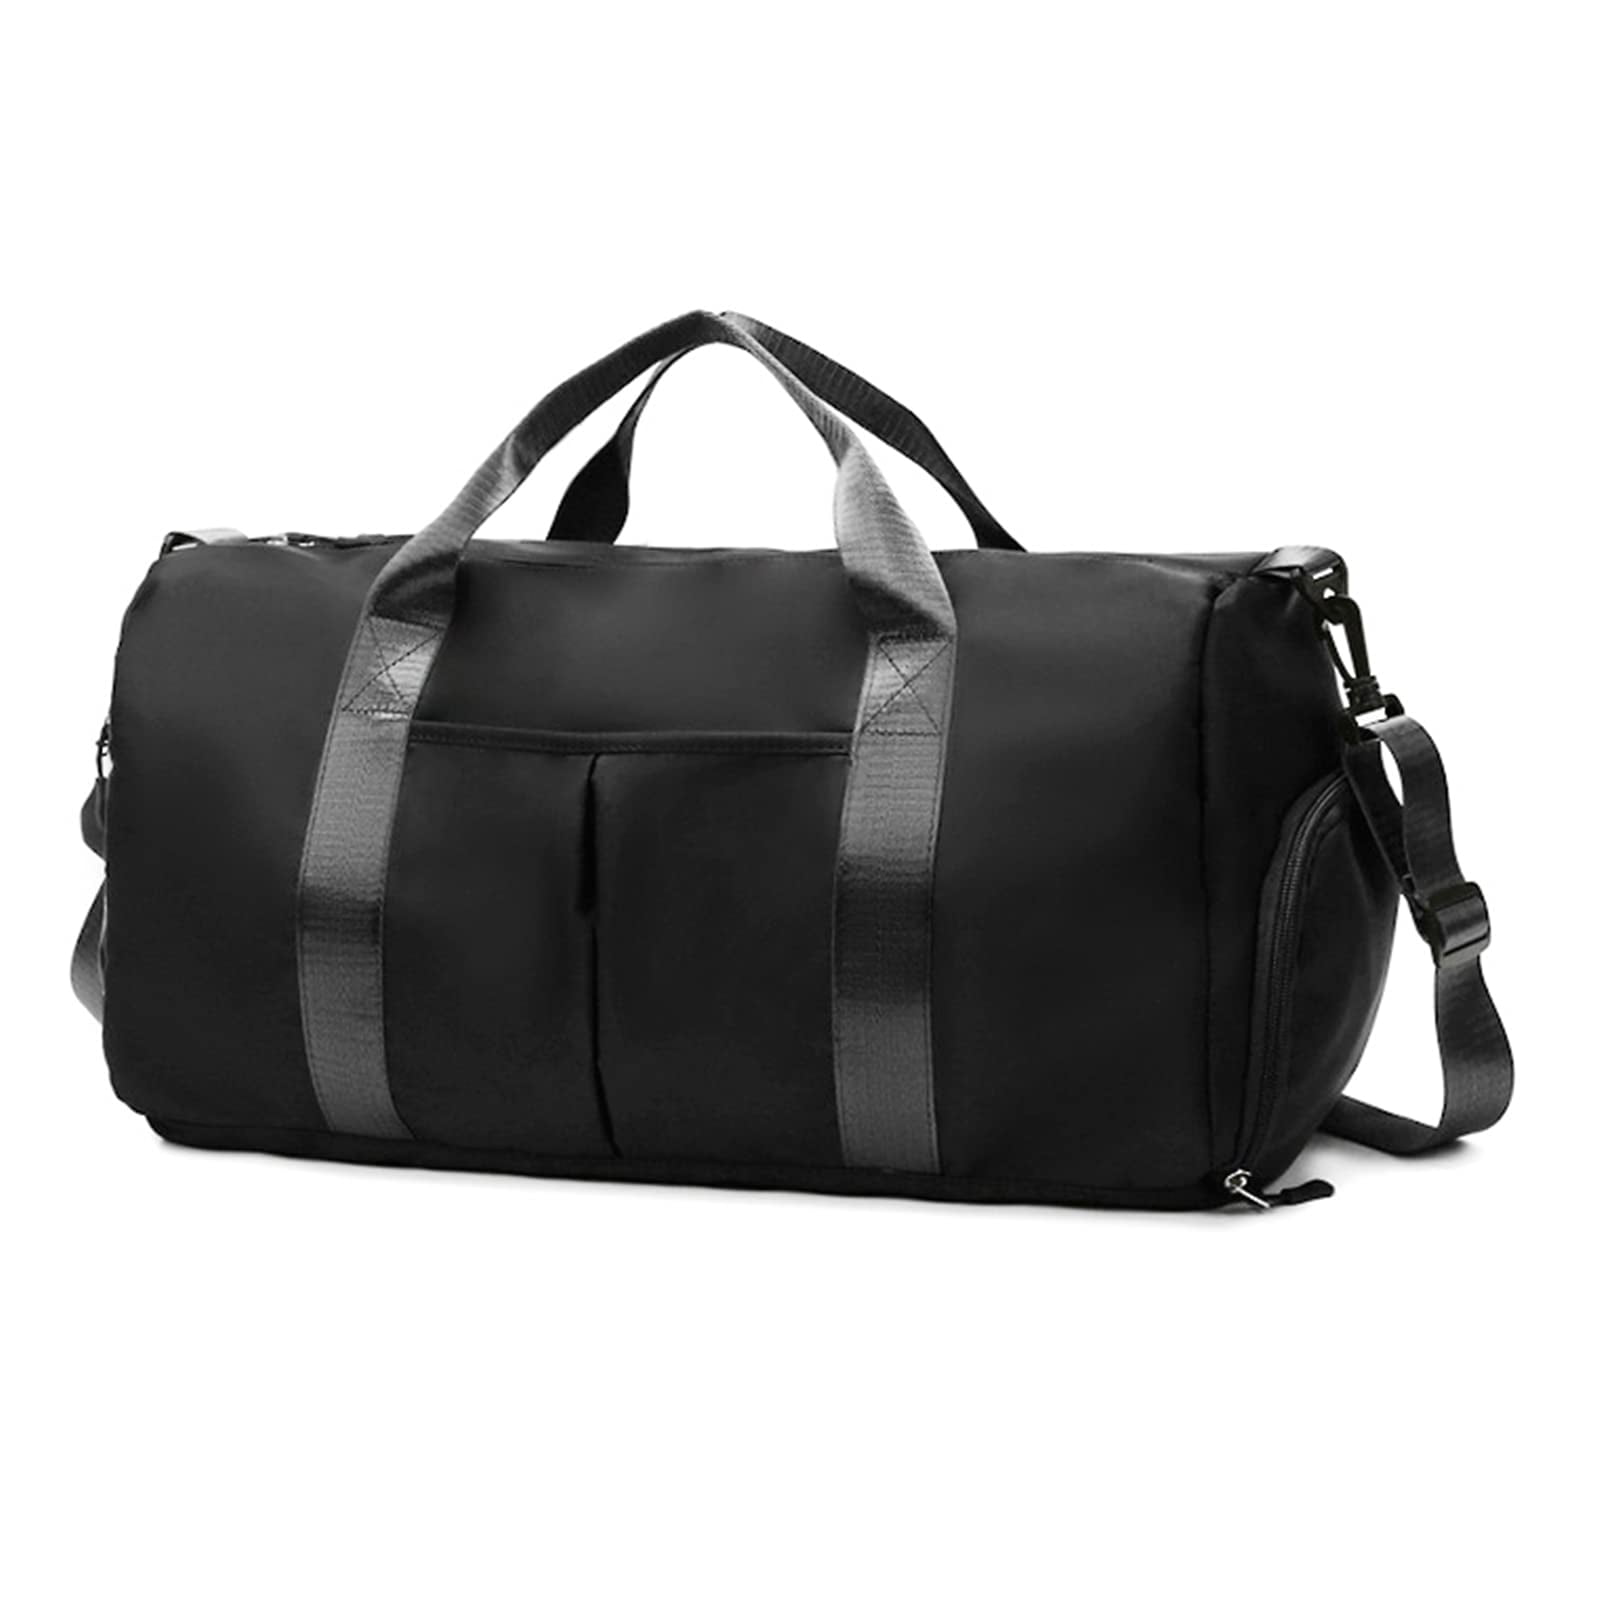 Sports Gym Bag with Wet Pocket & Shoes Compartment, Waterproof Shoulder ...